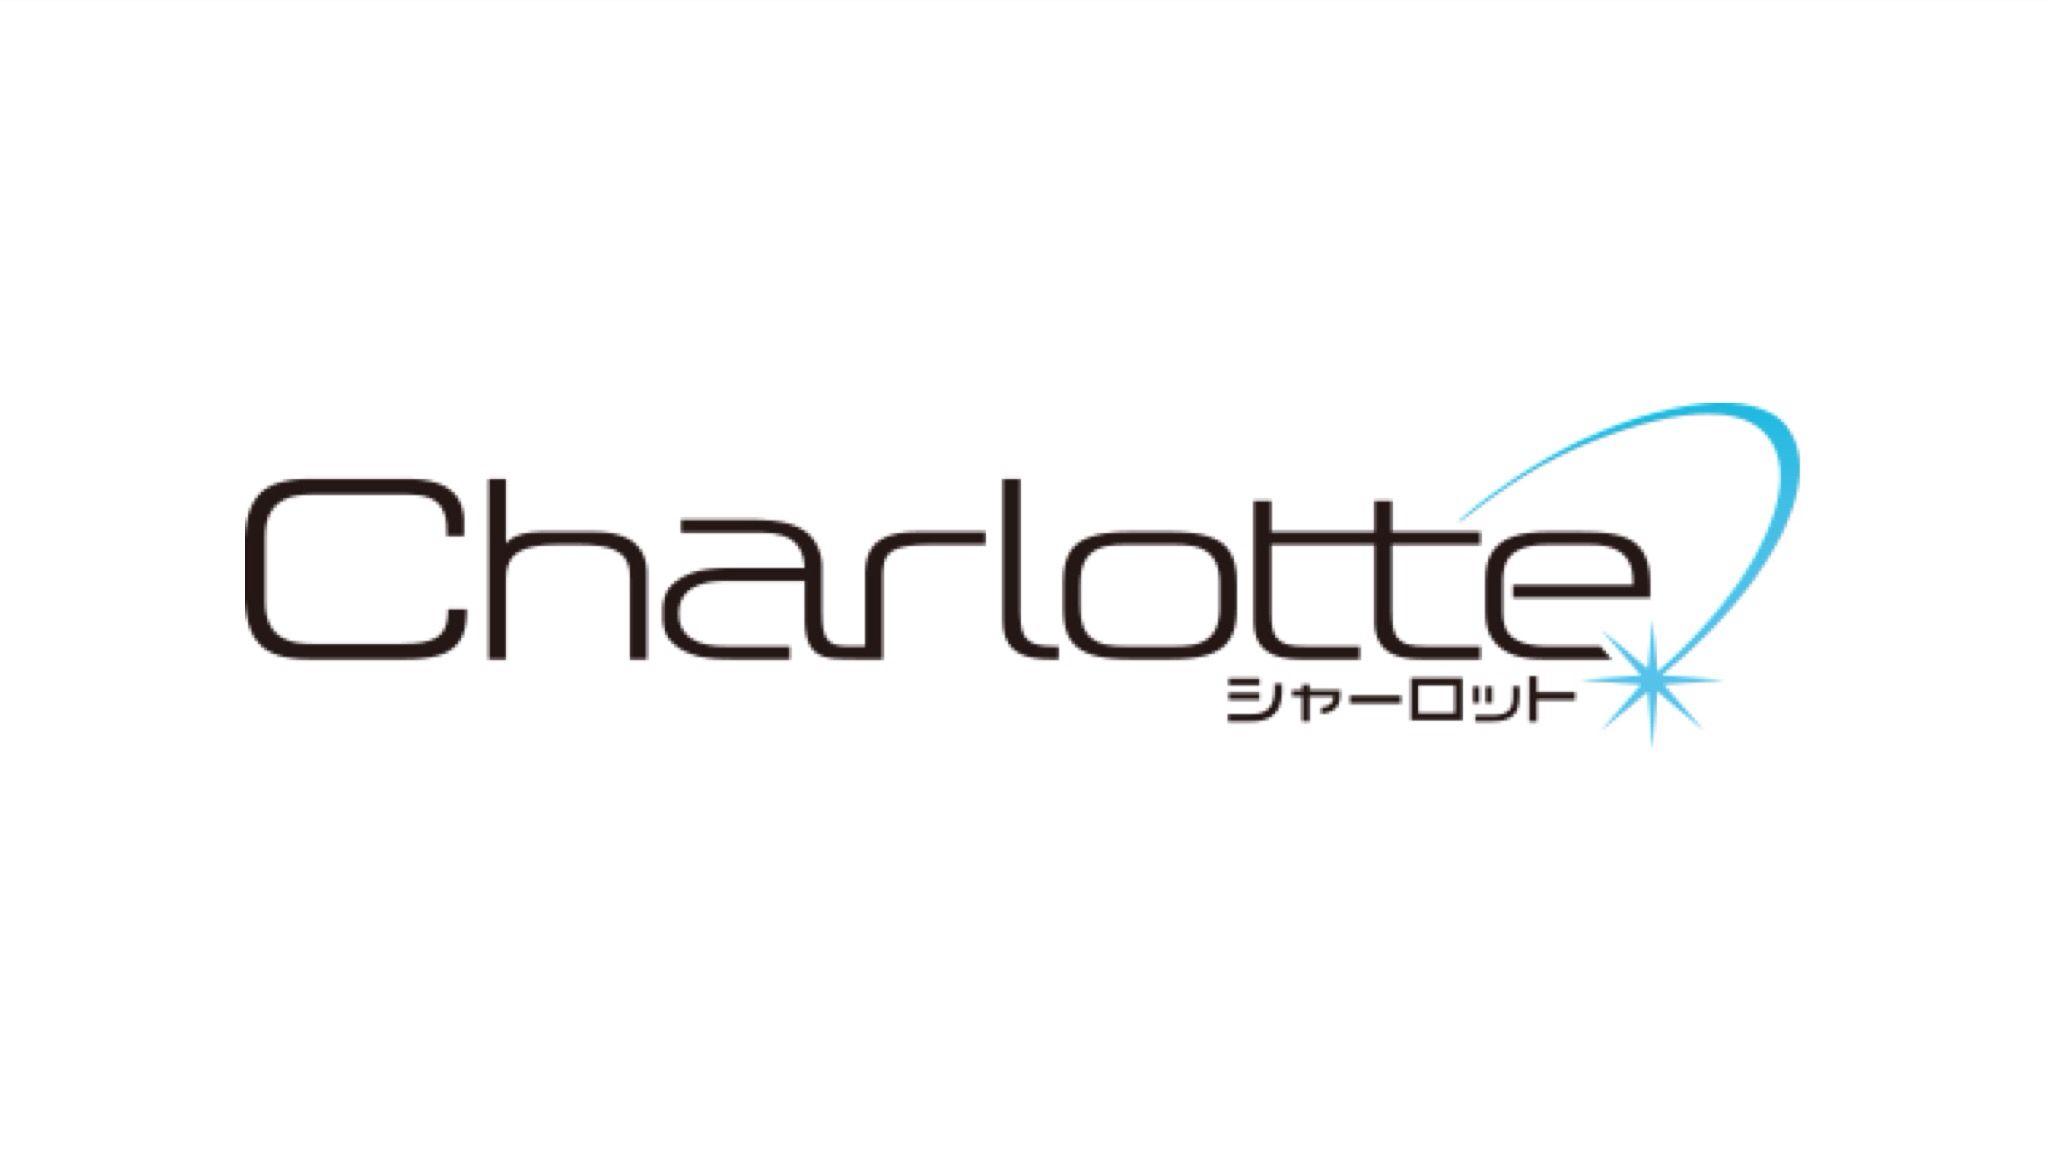 Charlotte Logo - Charlotte's logo is really great because of how it uses a comet-like ...